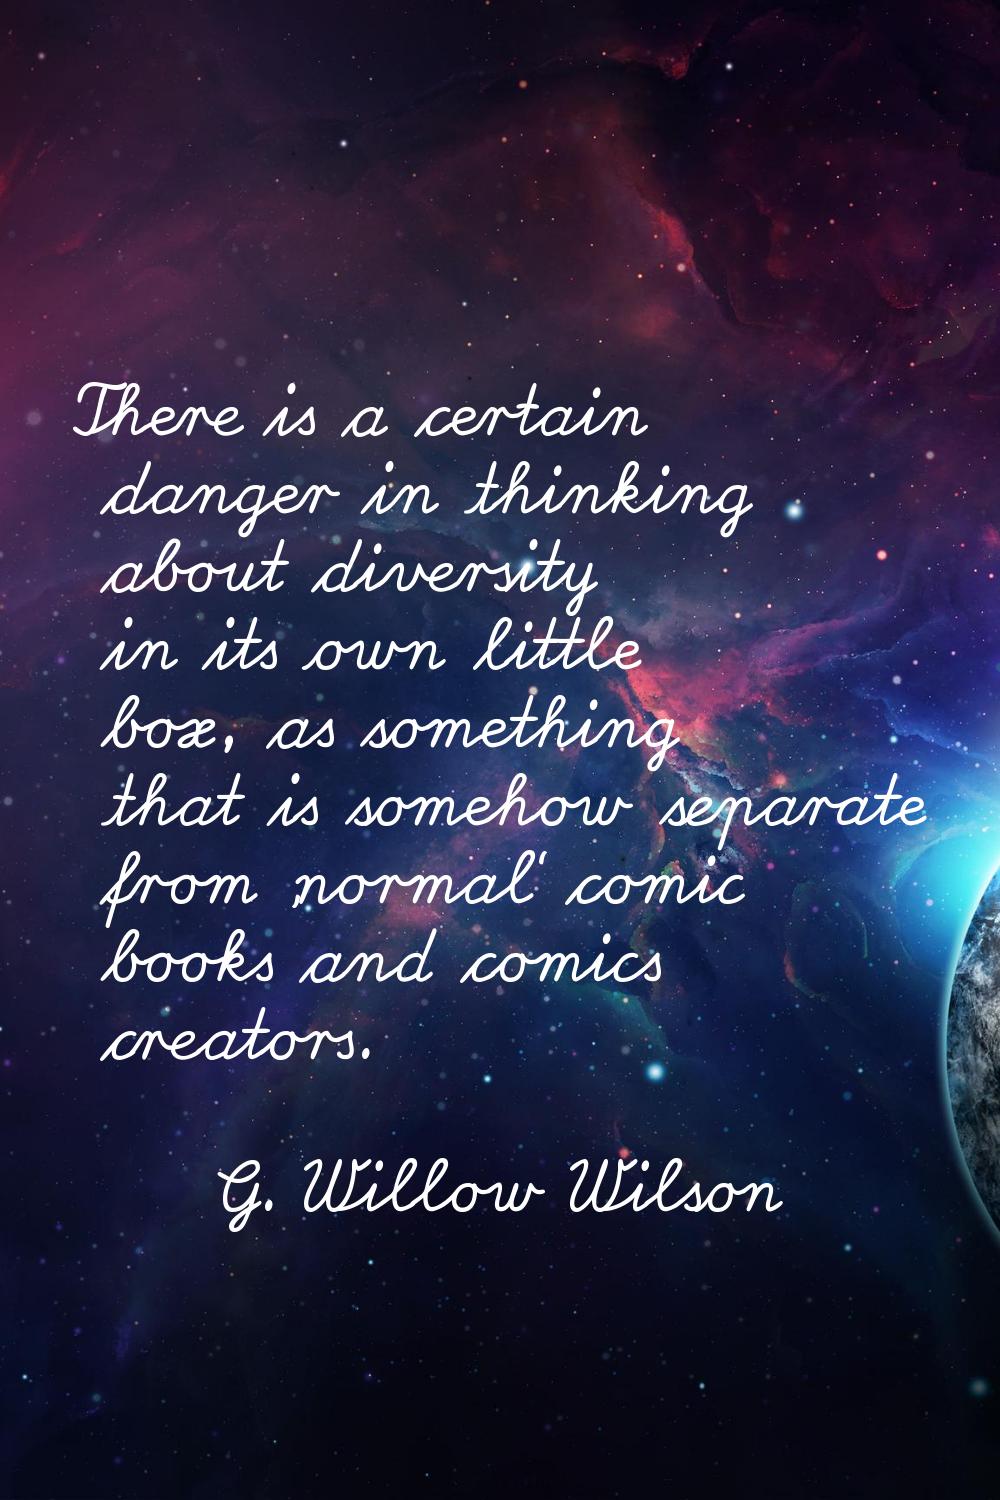 There is a certain danger in thinking about diversity in its own little box, as something that is s